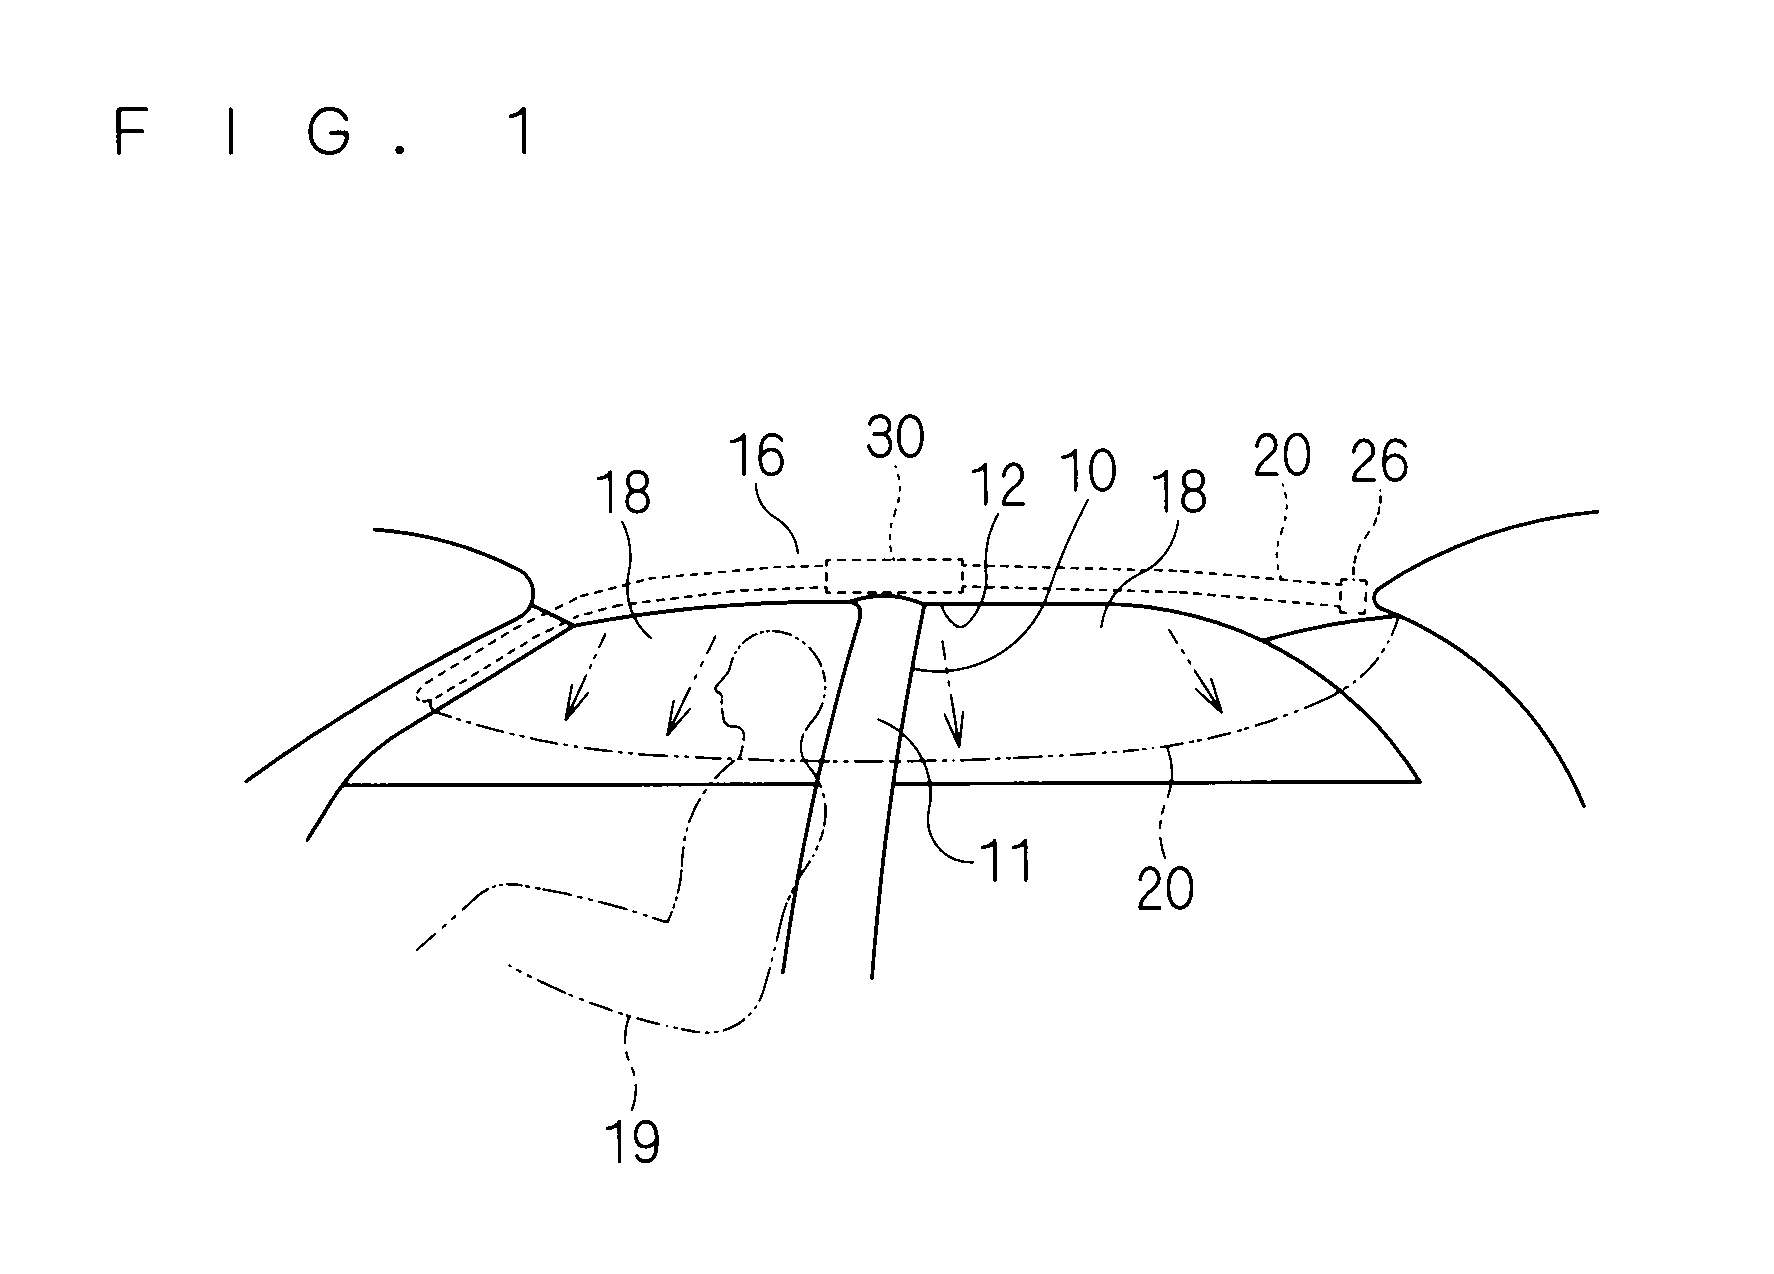 Member for restricting expansion of curtain airbag and structure of portion where curtain airbag is mounted